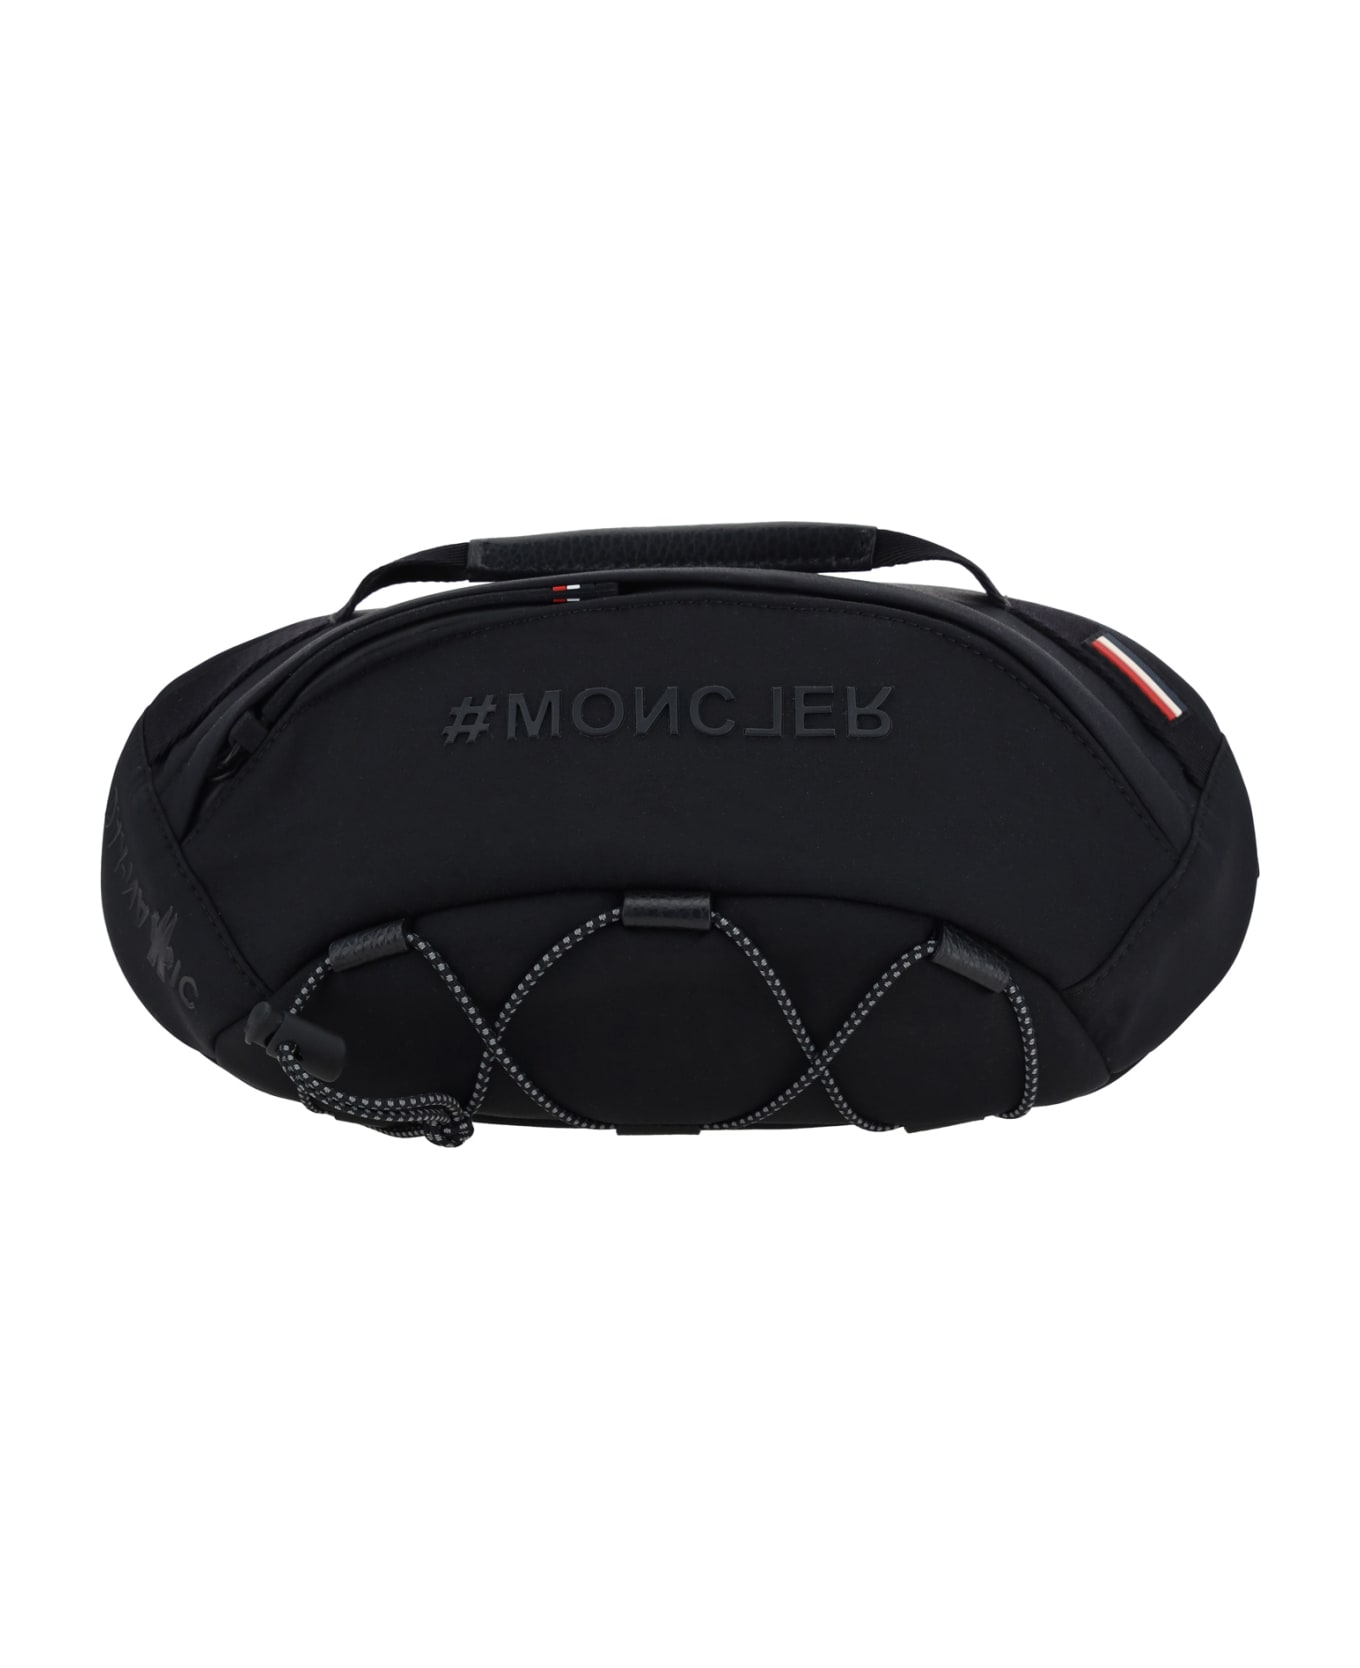 Moncler Grenoble Fanny Pack バッグ